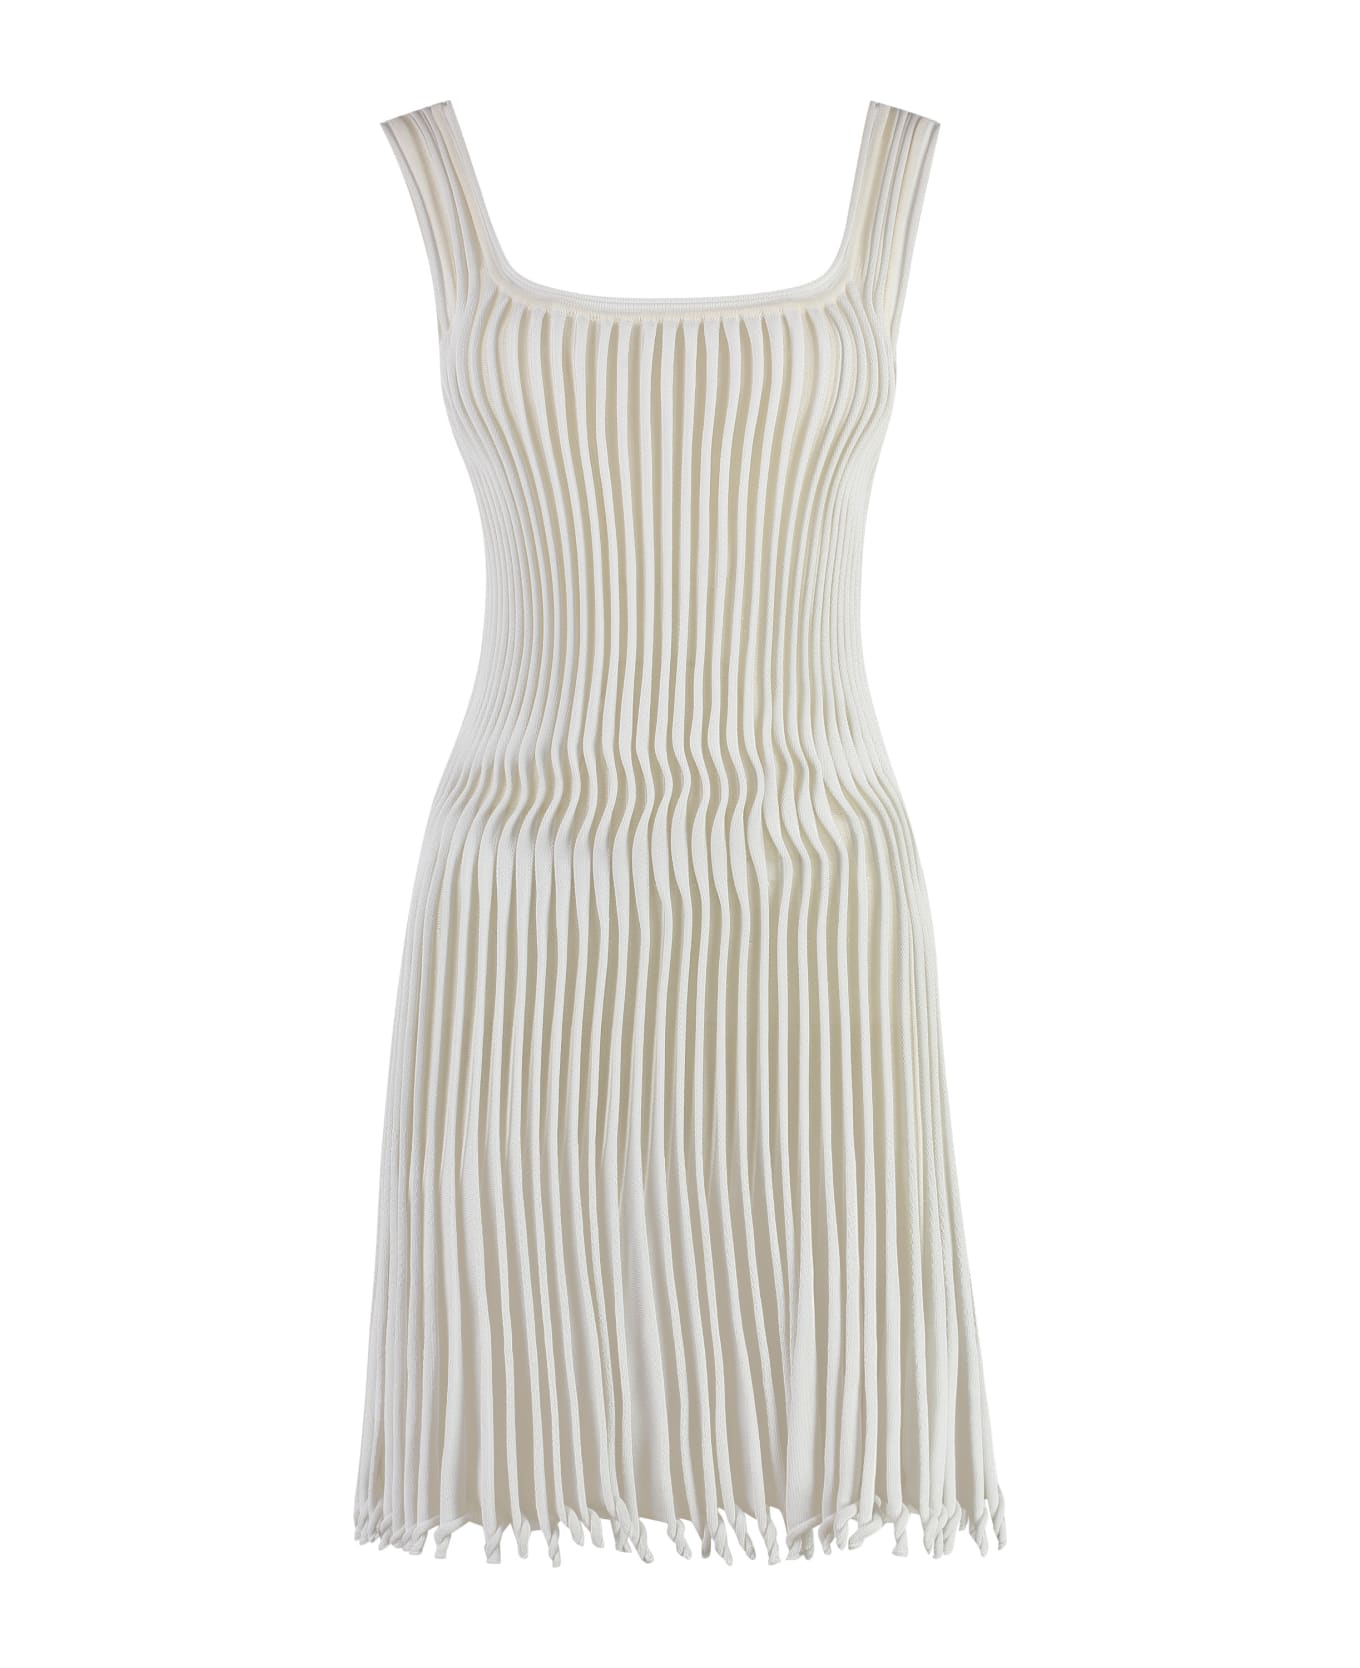 Alaia Knitted Dress - White